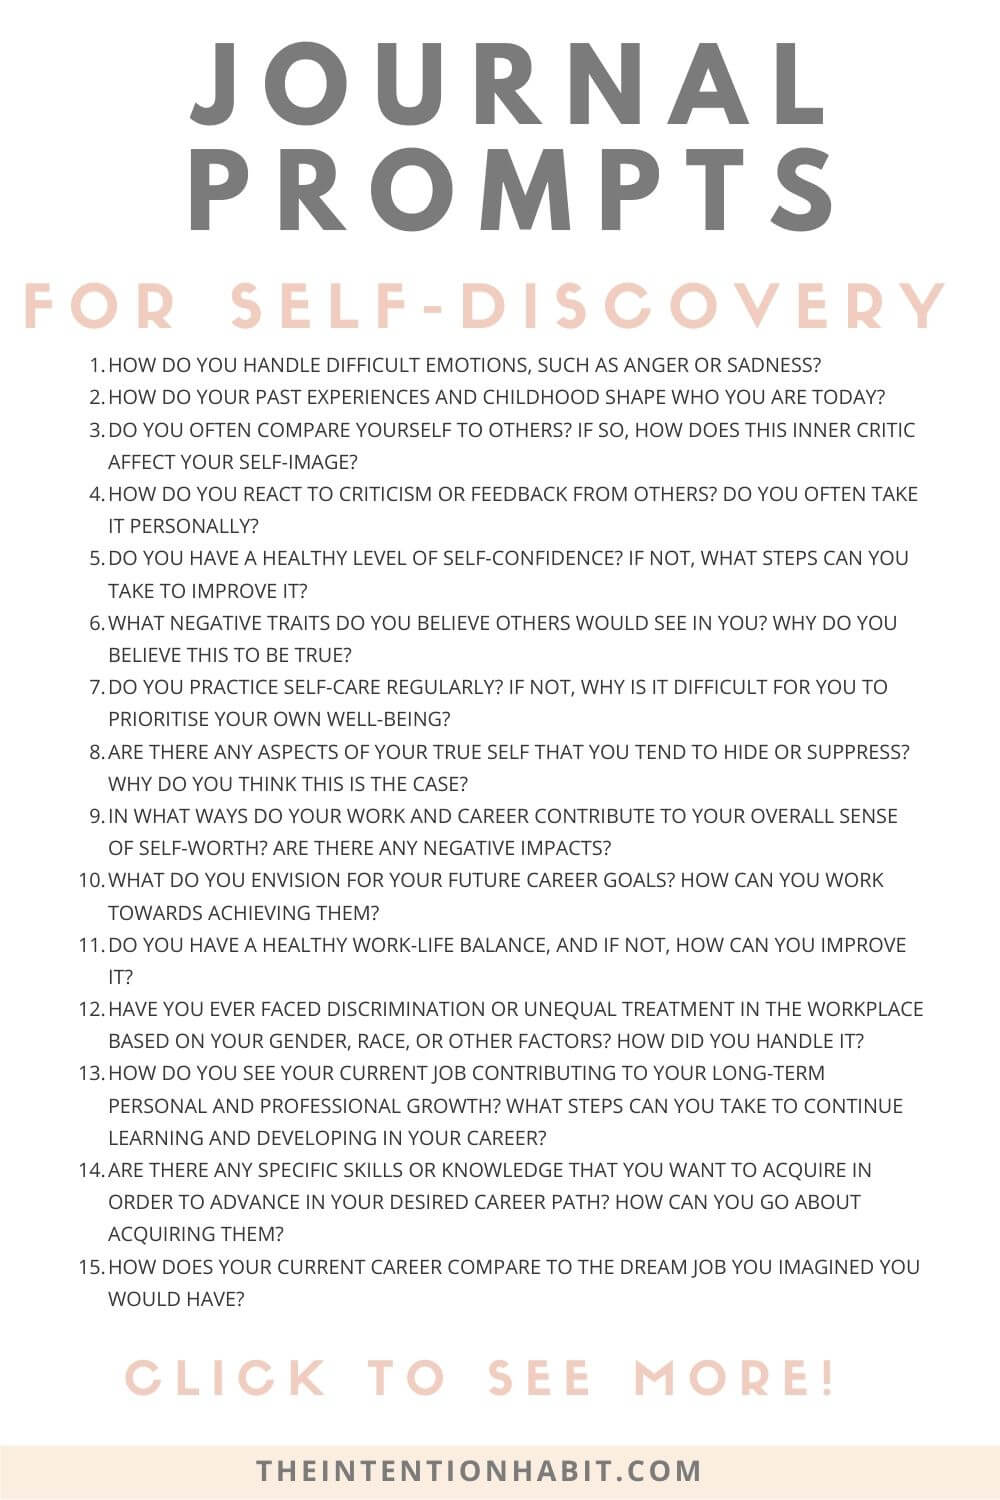 list of journal prompts for self discovery and self reflection.